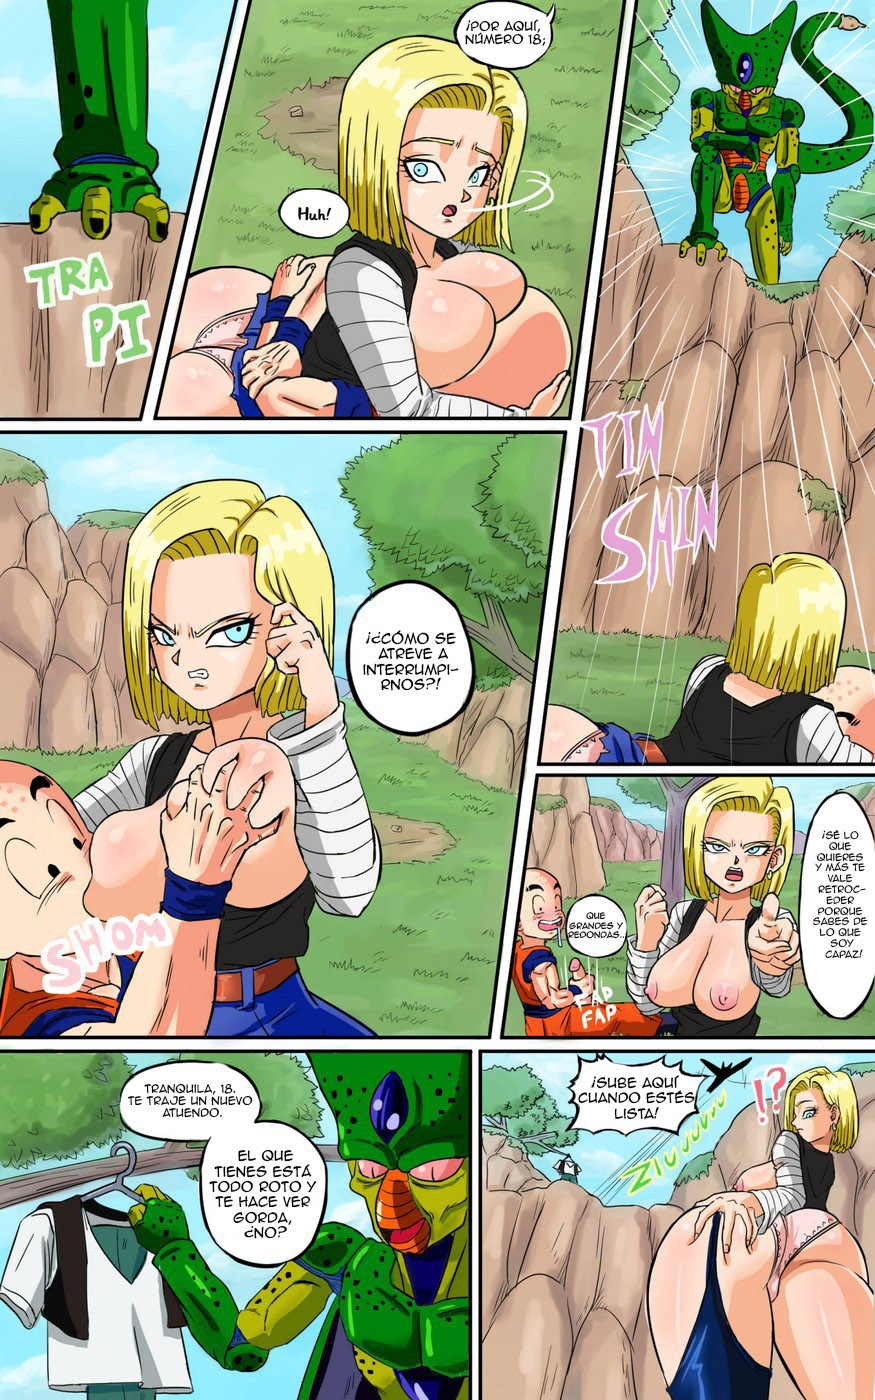 ANDROID 18 meets Krillin